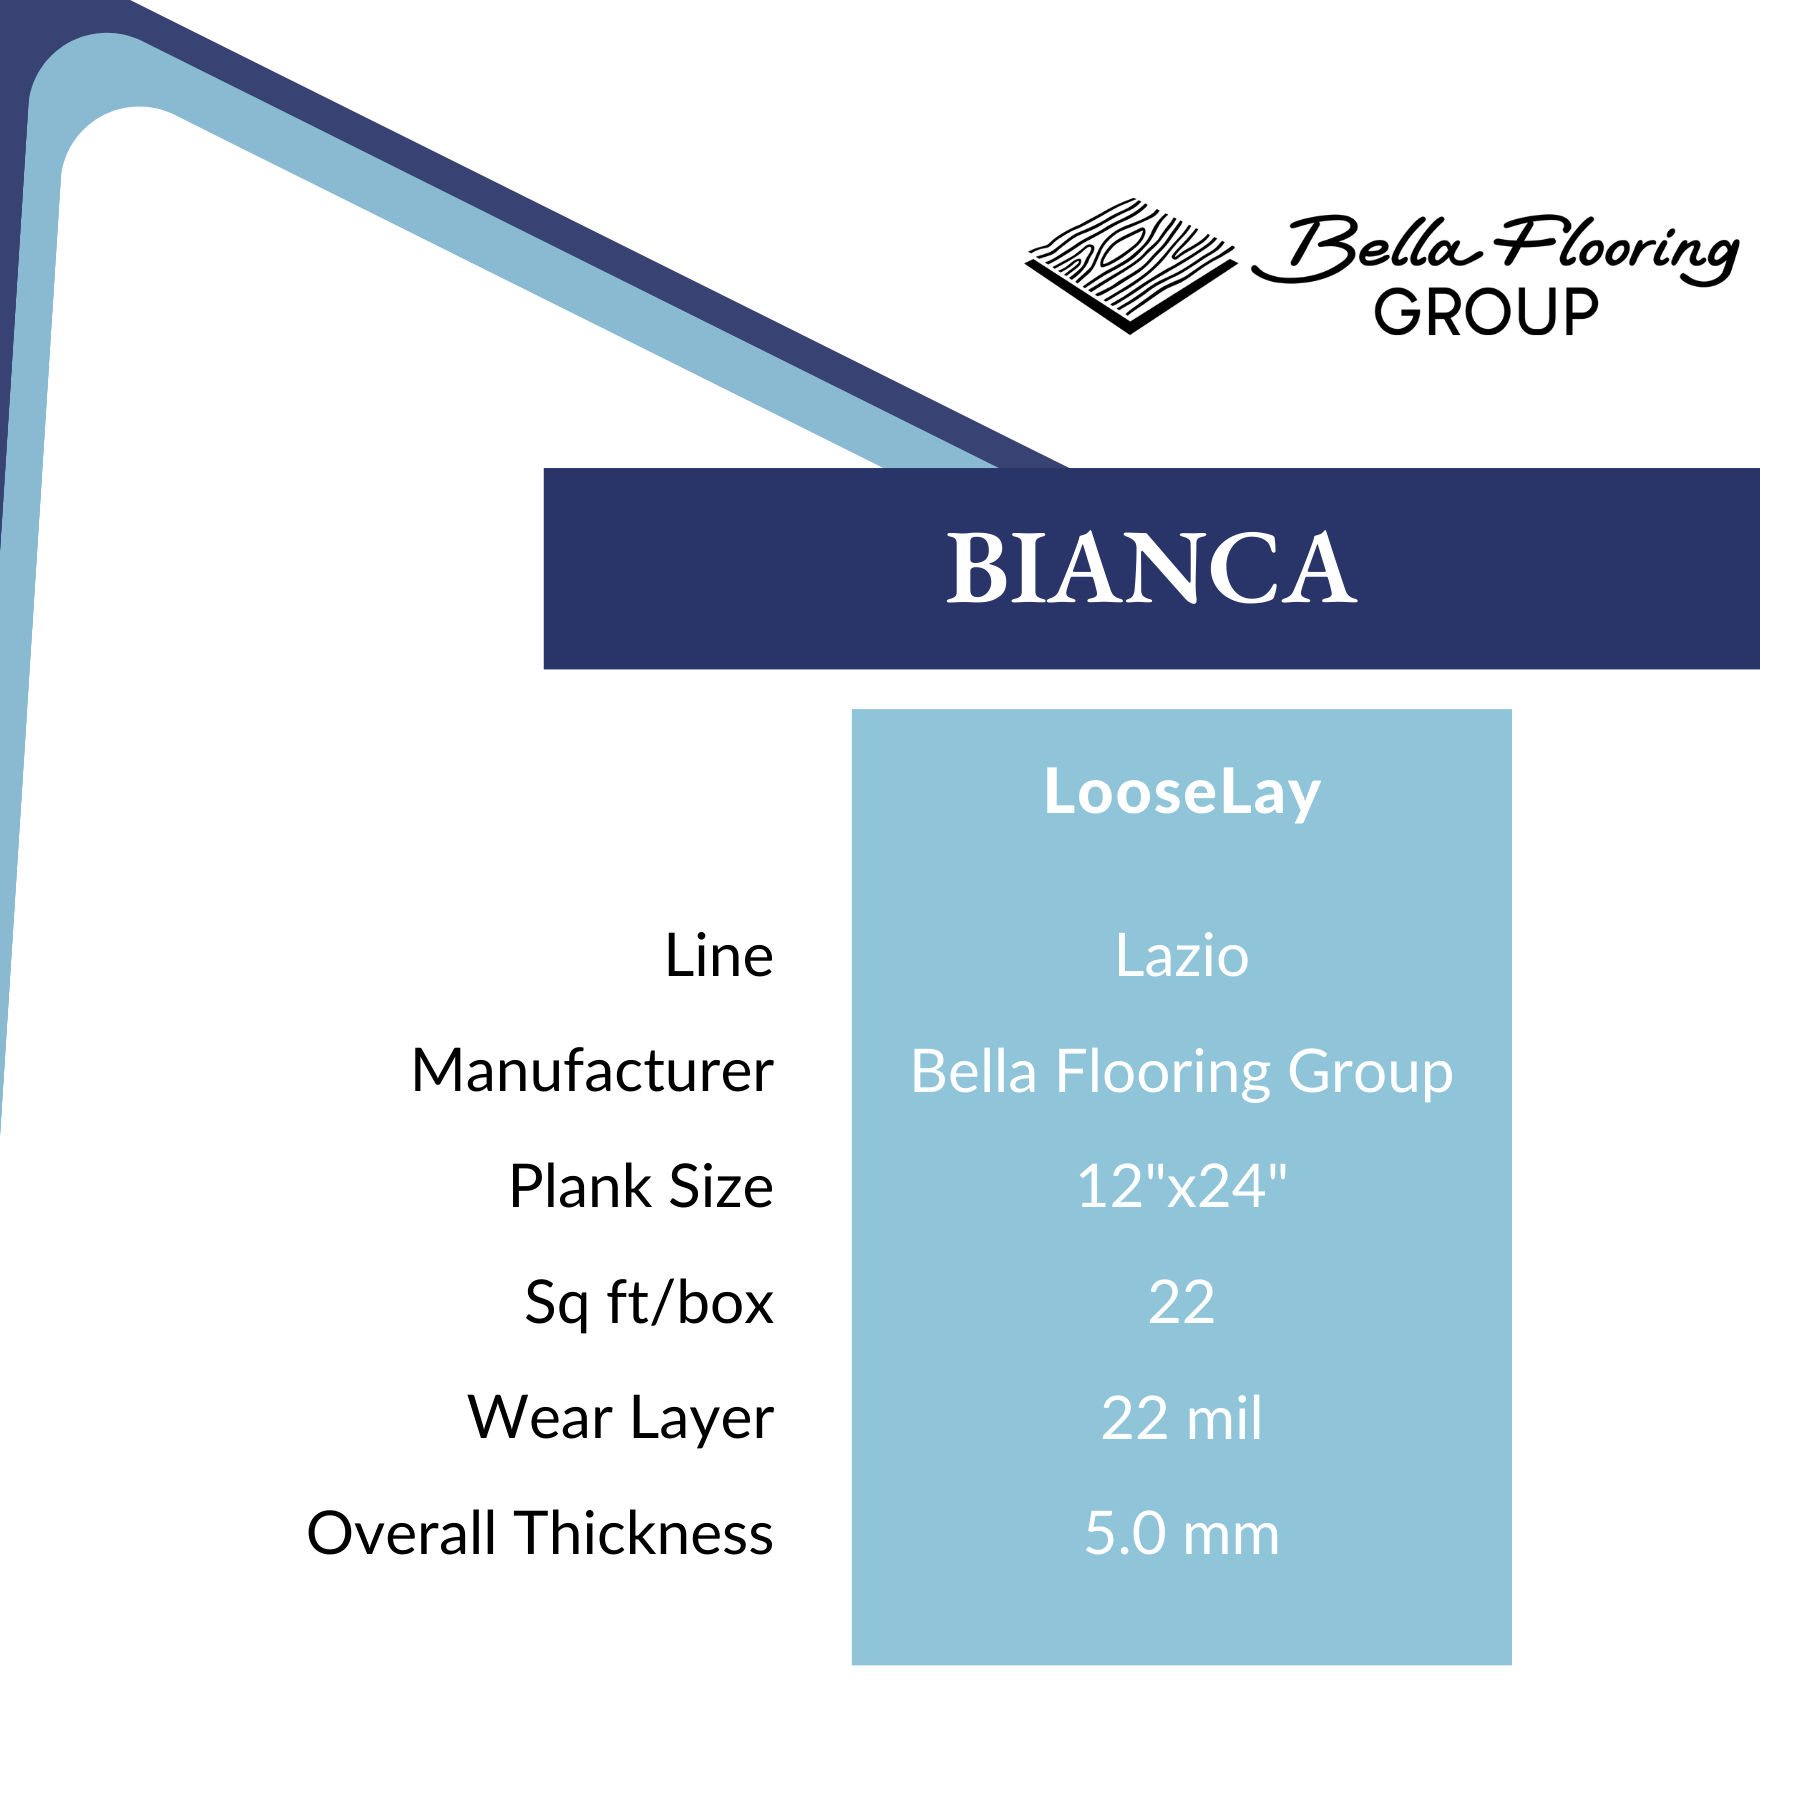 Bianca by Bella Flooring Group Clearance Flooring from Calhoun's Springfield Specs